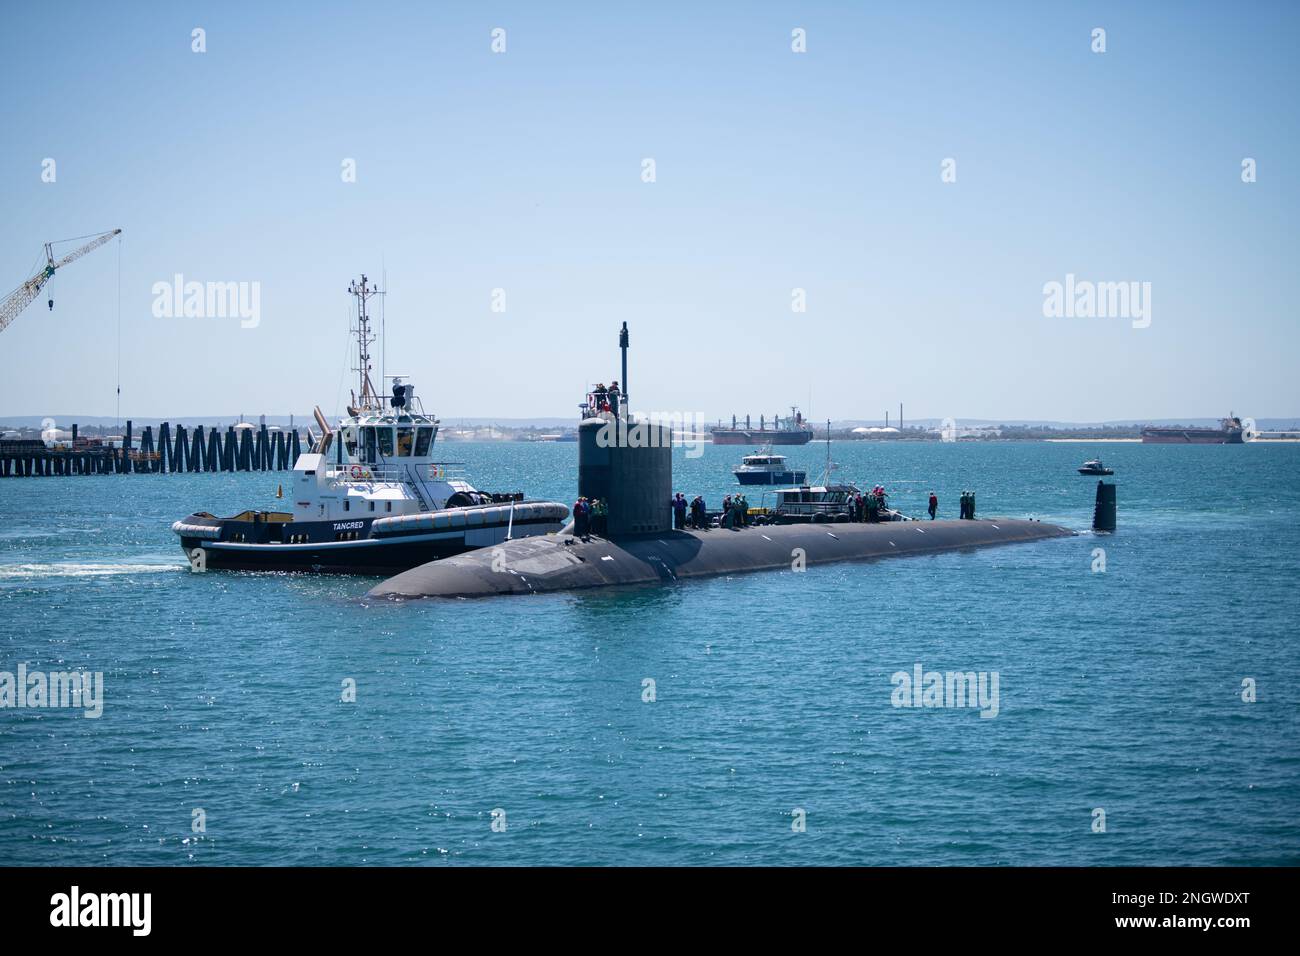 GARDEN ISLAND, Australia - The Virginia-class fast-attack submarine USS Mississippi (SSN 782) arrives at Royal Australian Navy HMAS Stirling Naval Base, Nov. 28. Mississippi is currently on patrol in support of national security interests in the U.S. 7th Fleet area of operations. Stock Photo